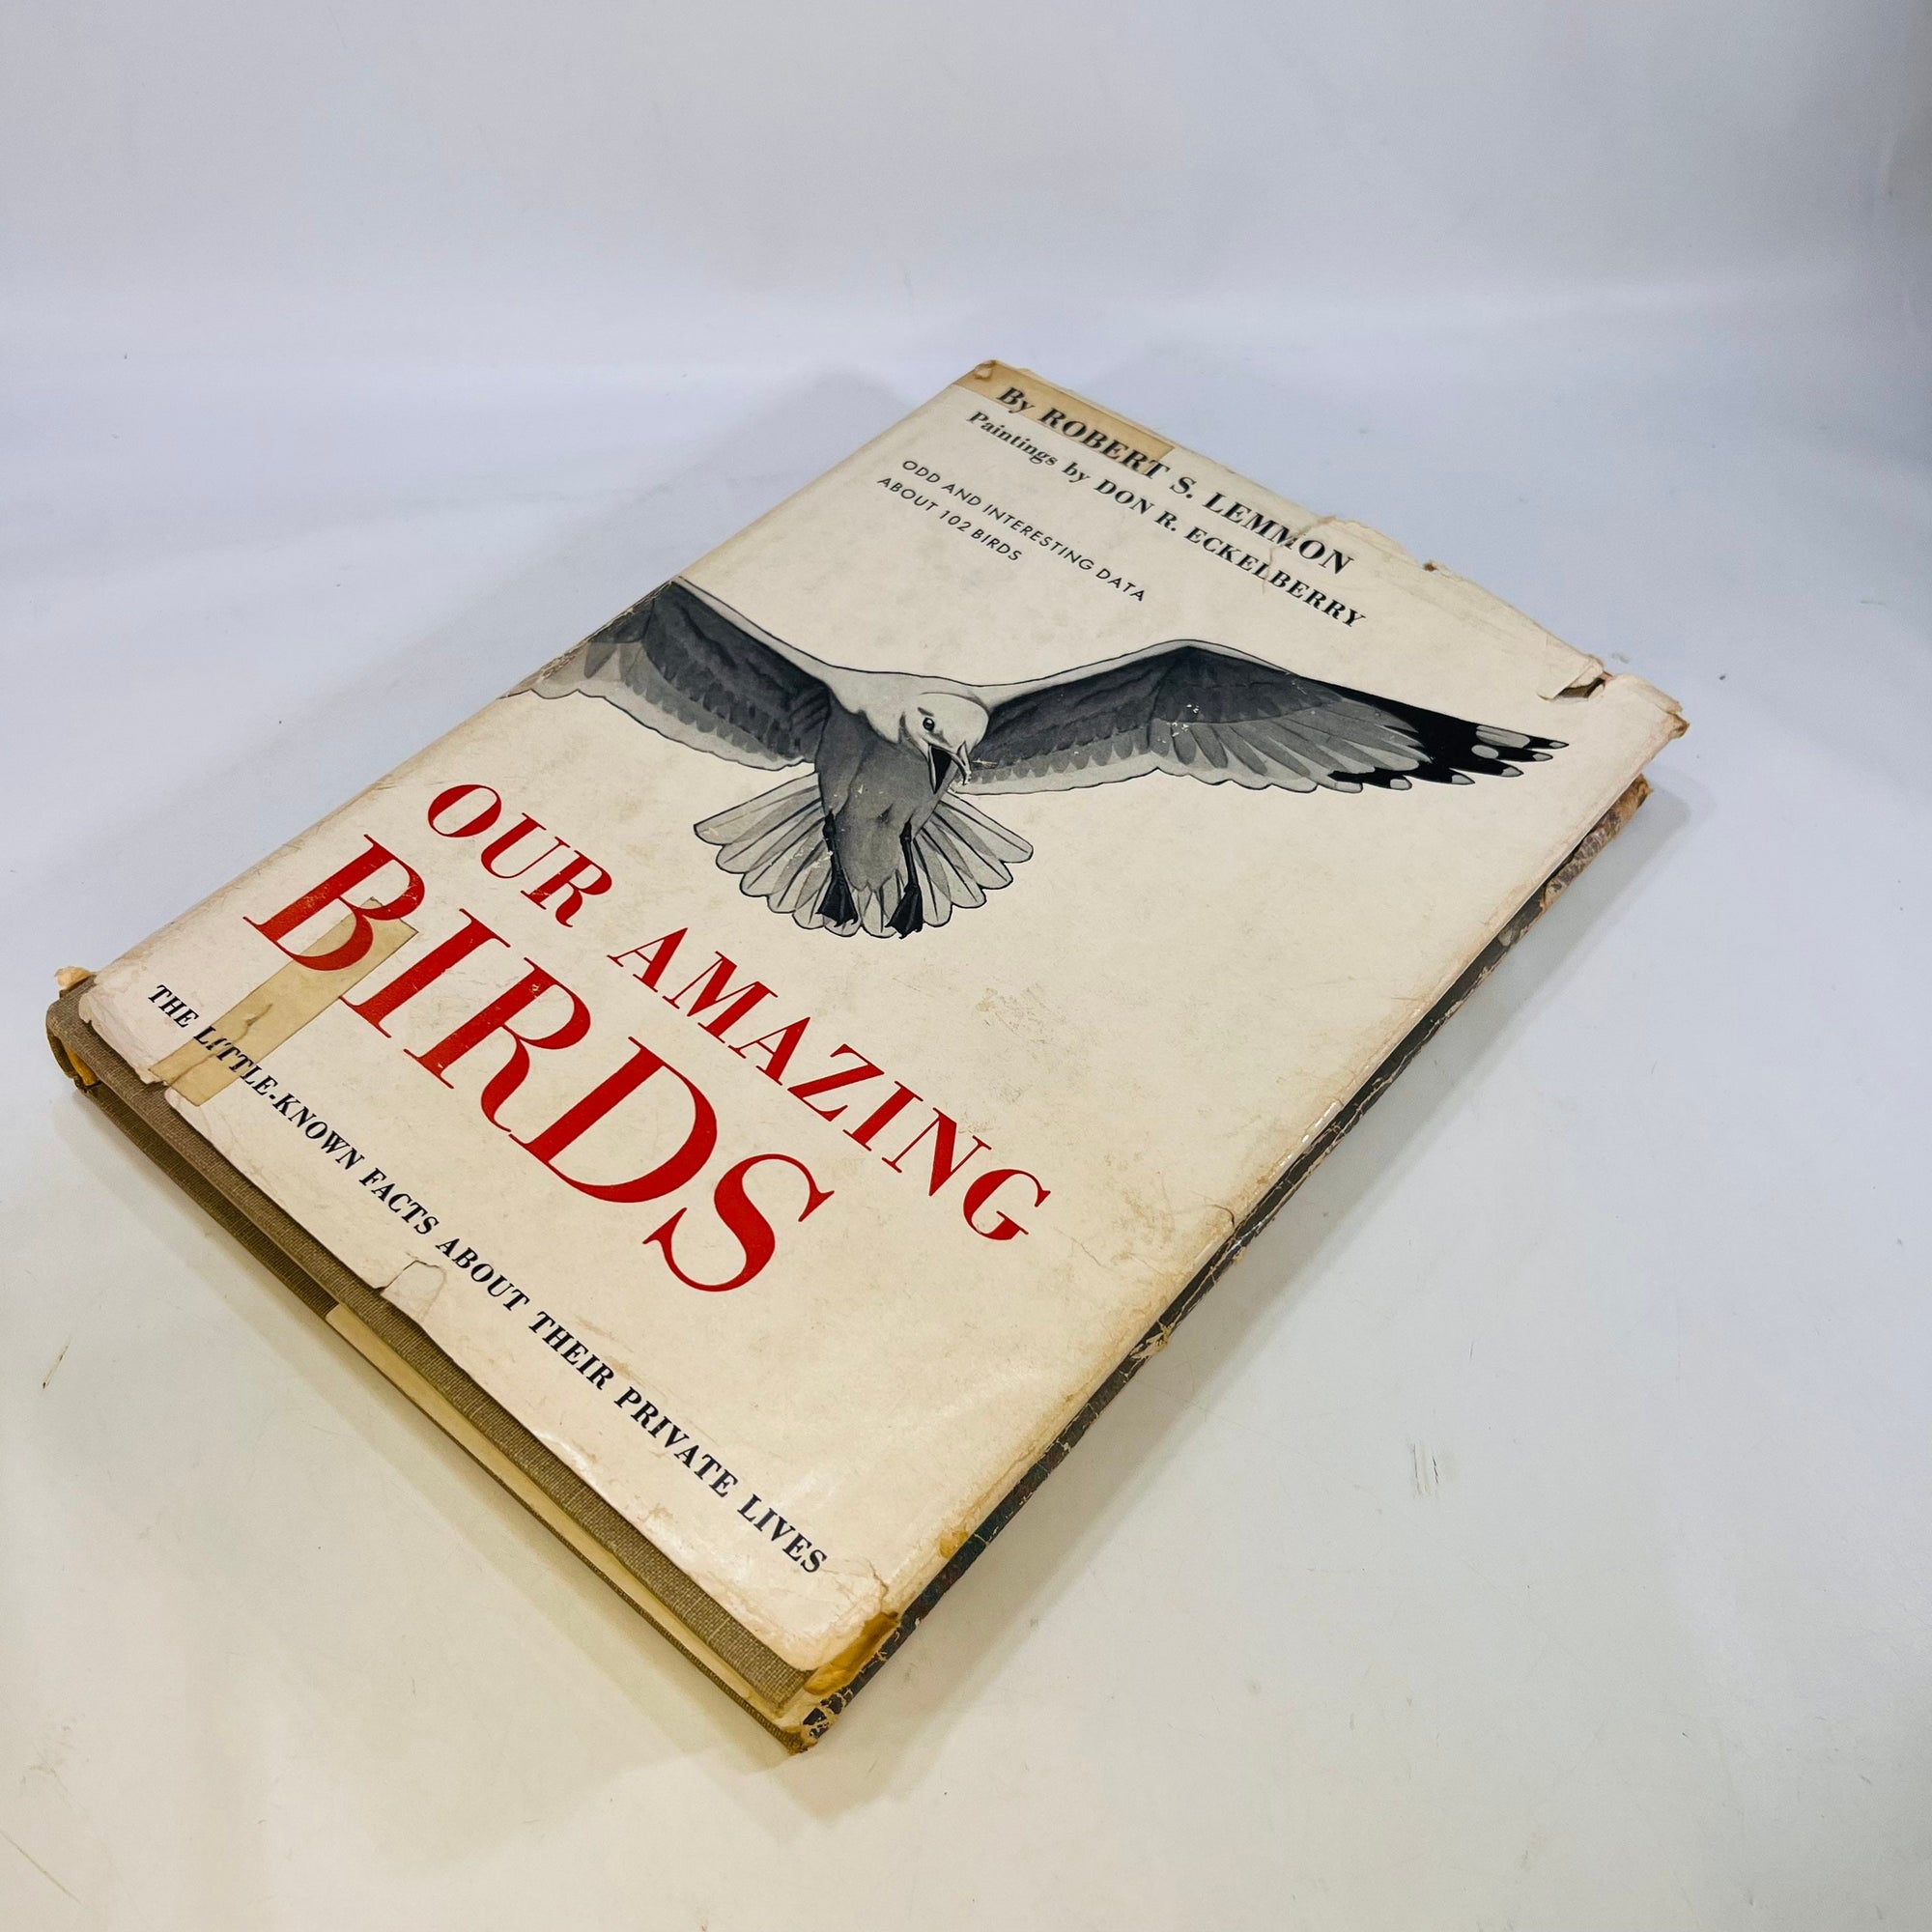 Our Amazing Birds little known facts about their private lives by Robert S. Lemon 1952 Odd and Interesting Data of 102 Birds Double Day Pub